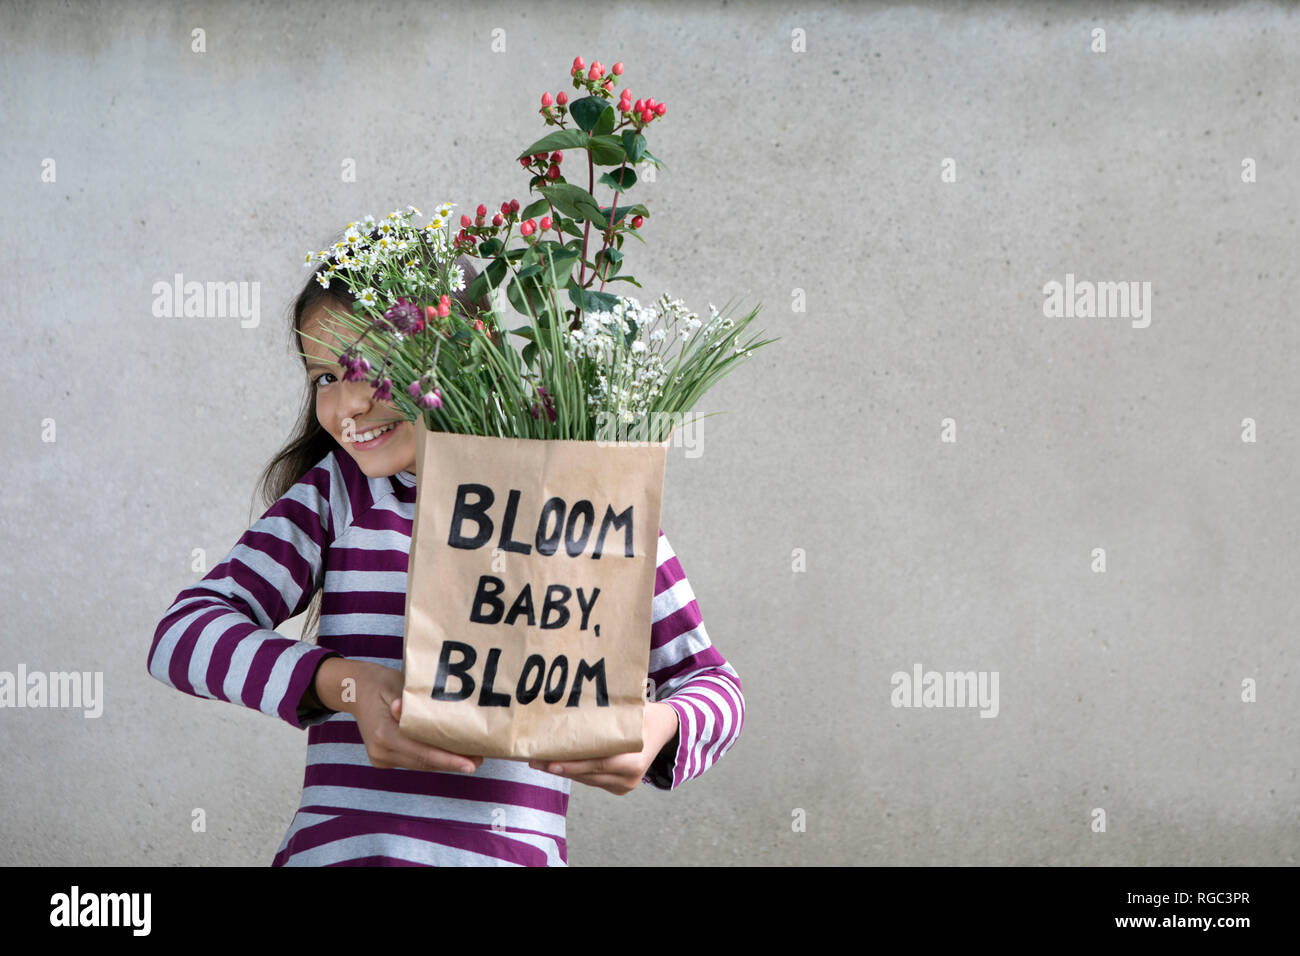 Smiling girl holding paper bag with flowers Stock Photo